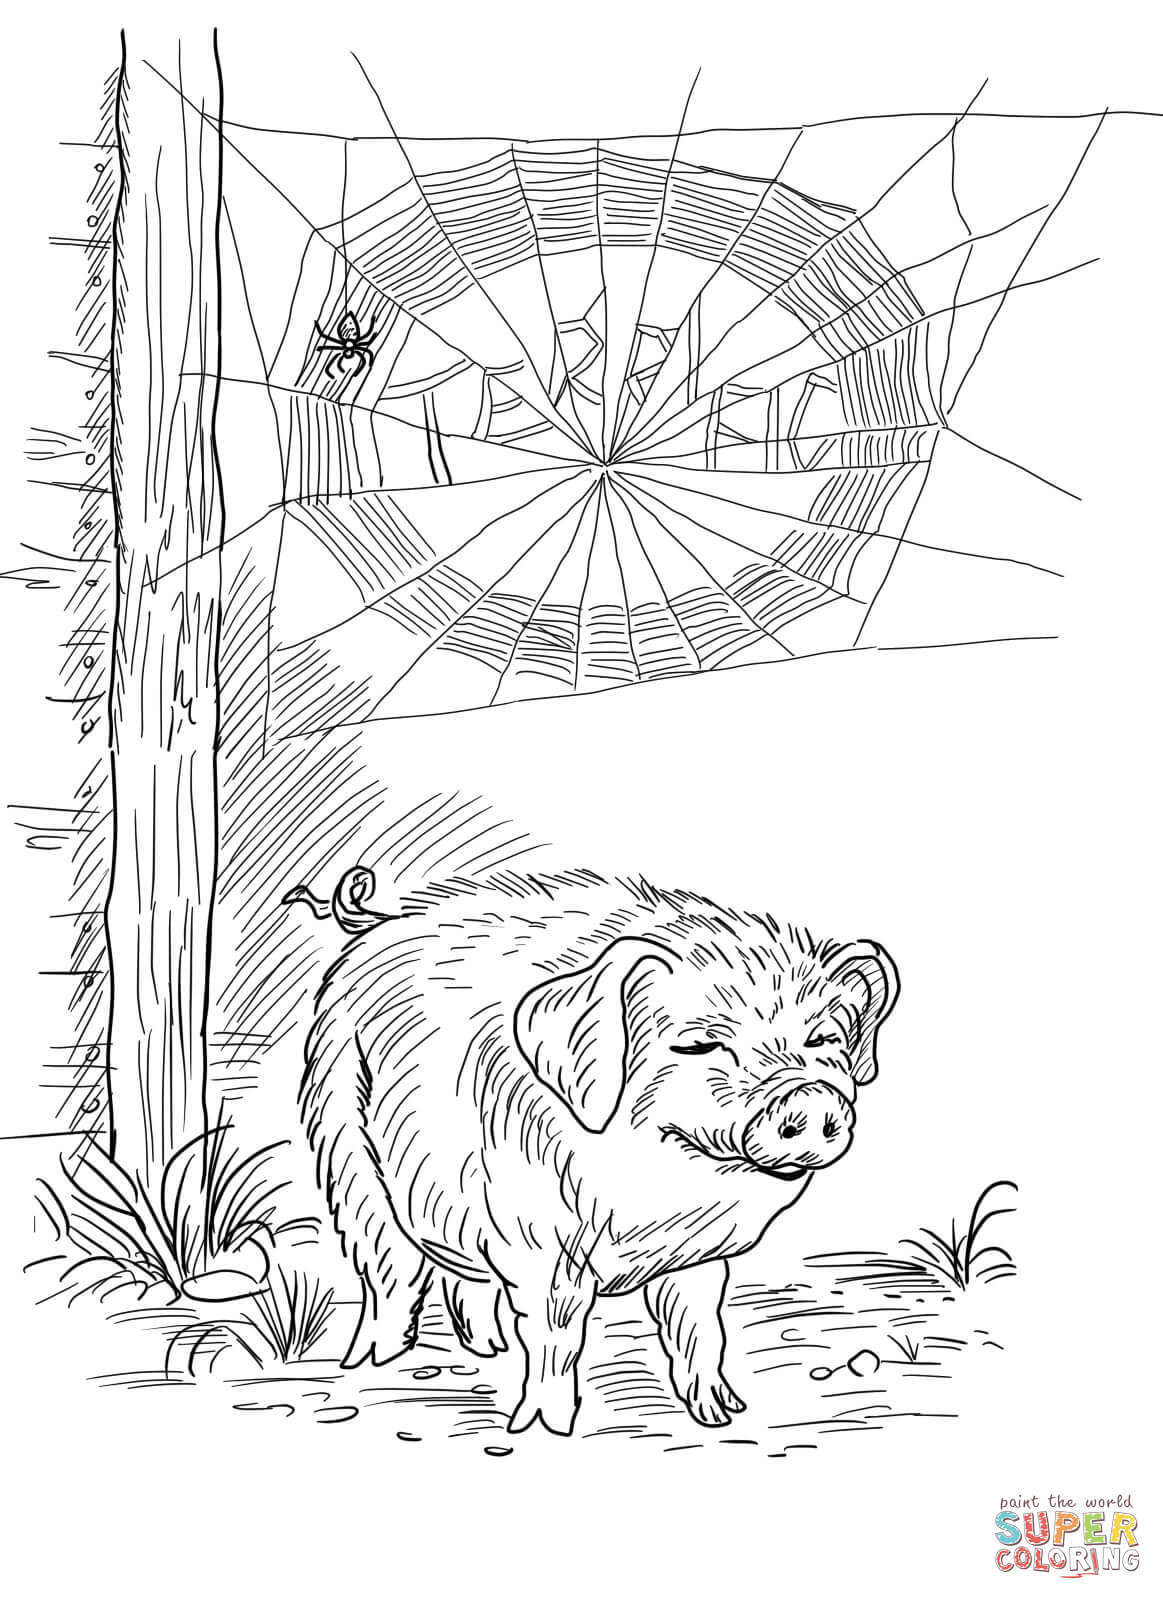 Free Charlottes Web Coloring Pages Download Free Clip Art Free Clip Art On Clipart Library Charlotte's web is a book by e.b. clipart library